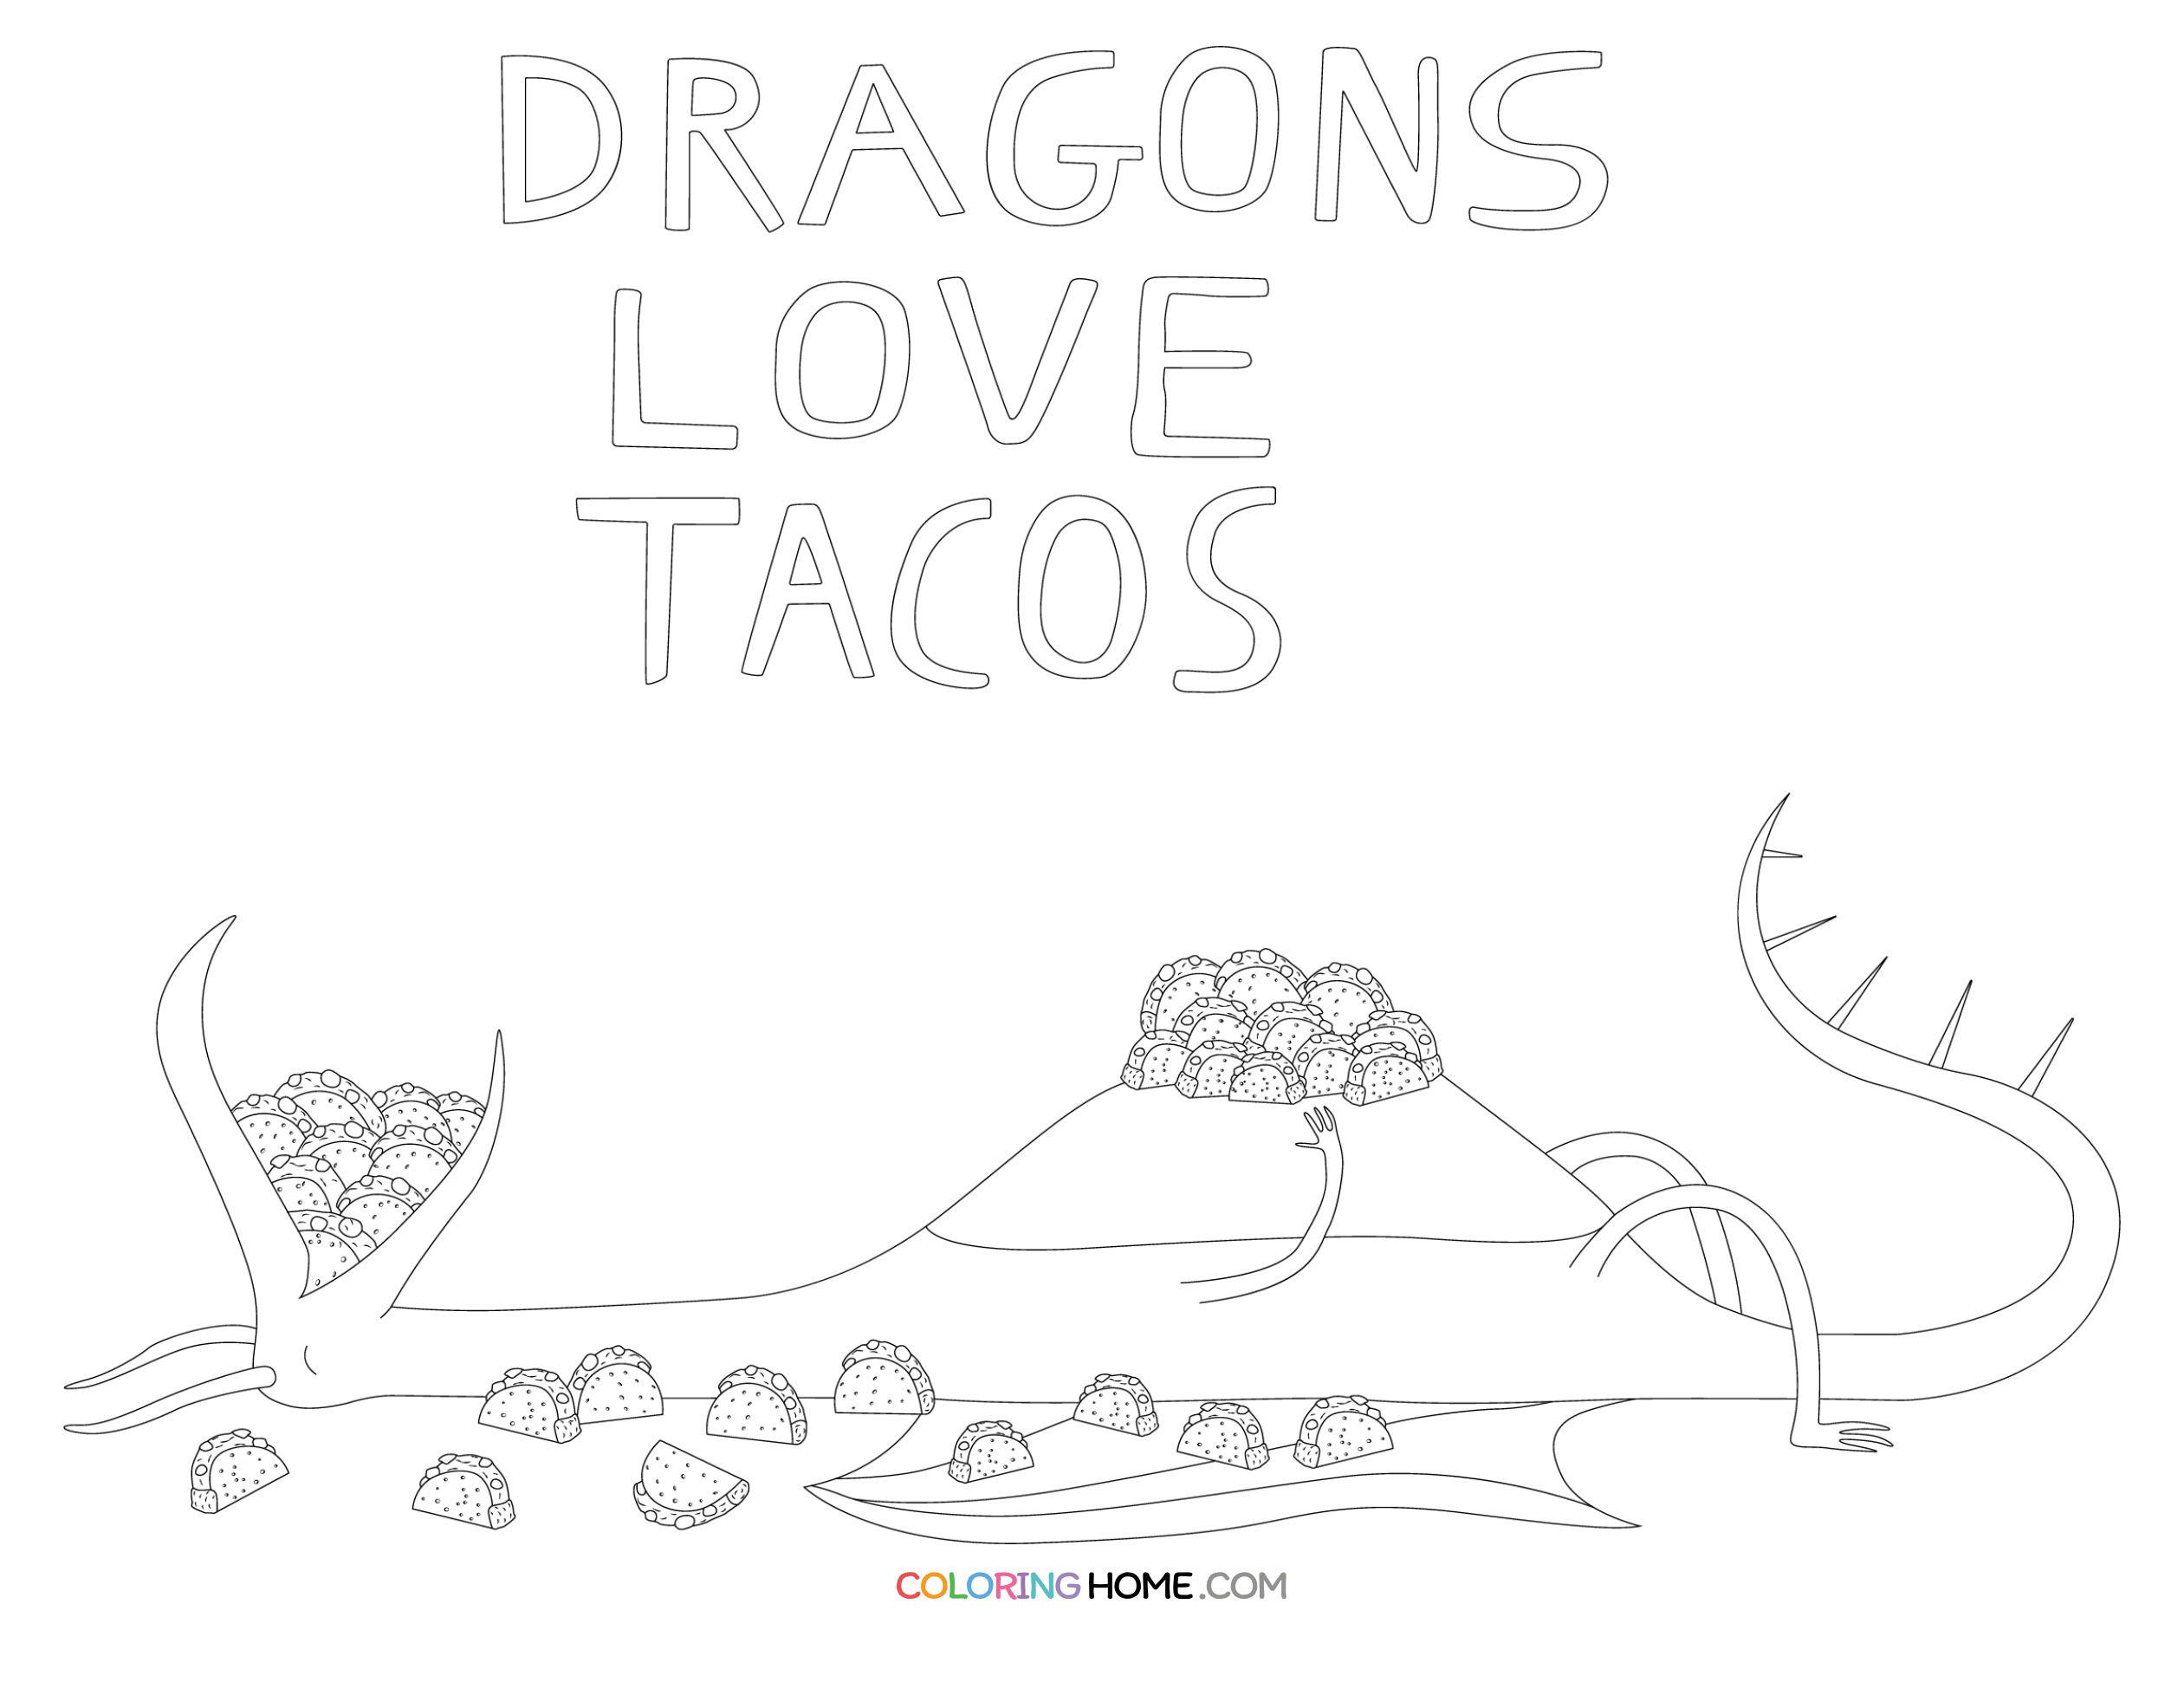 dragons-love-tacos-coloring-page-coloring-home